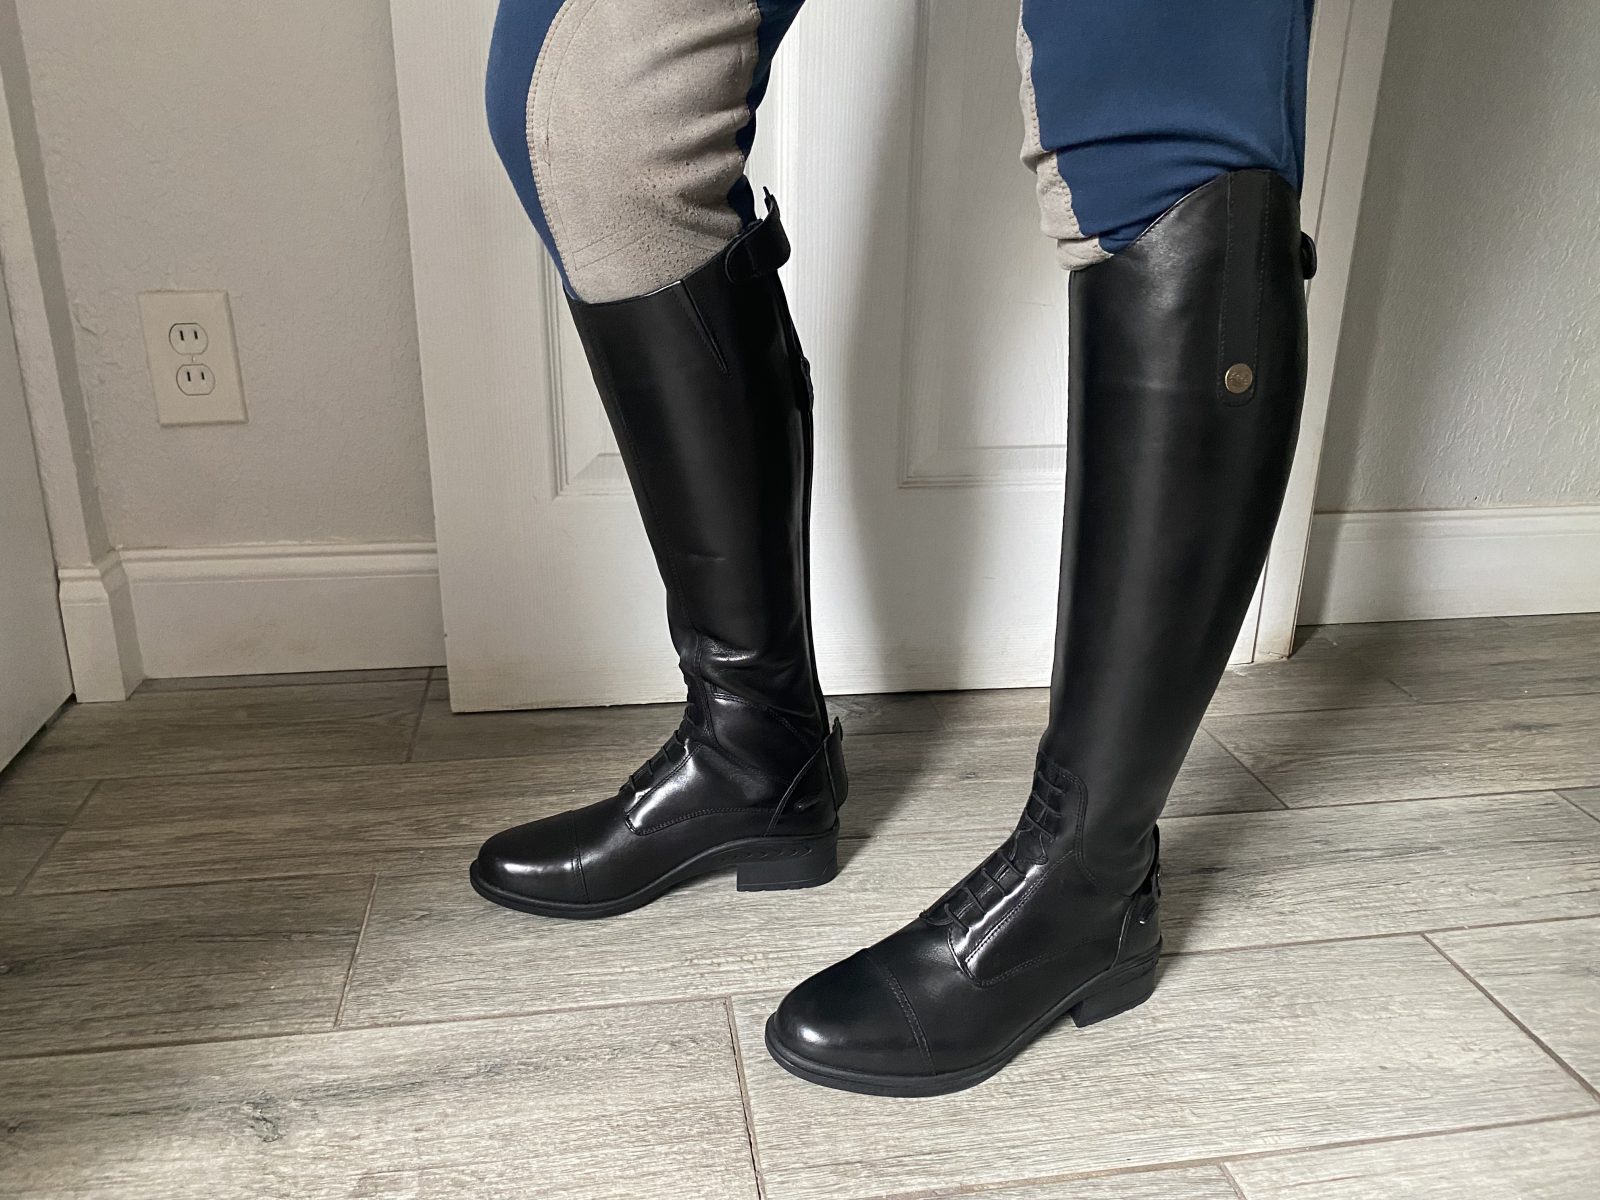 Product Review: Eliza Tall Field Boots by SmartPak - Heels Down Mag